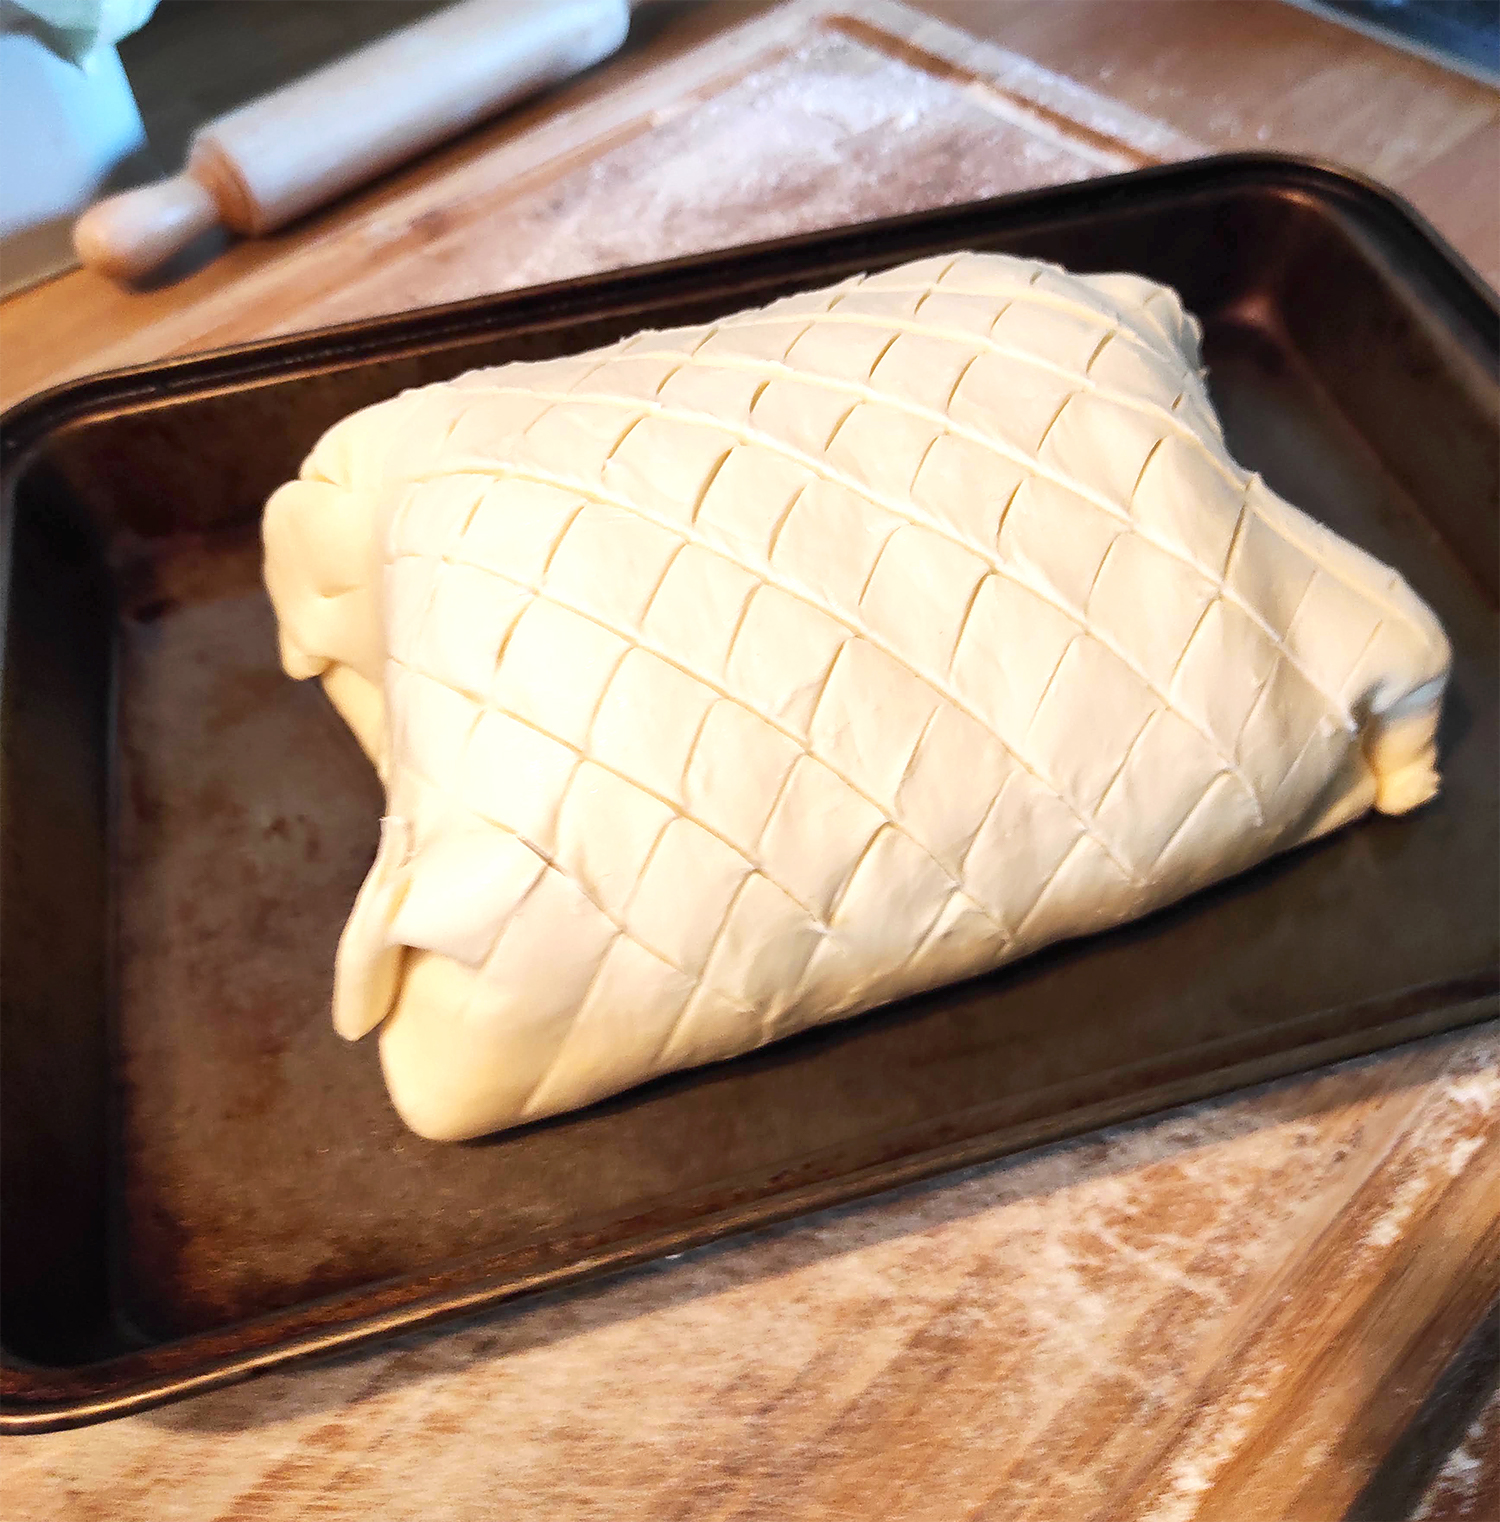 Beef wellington wrapped in pastry